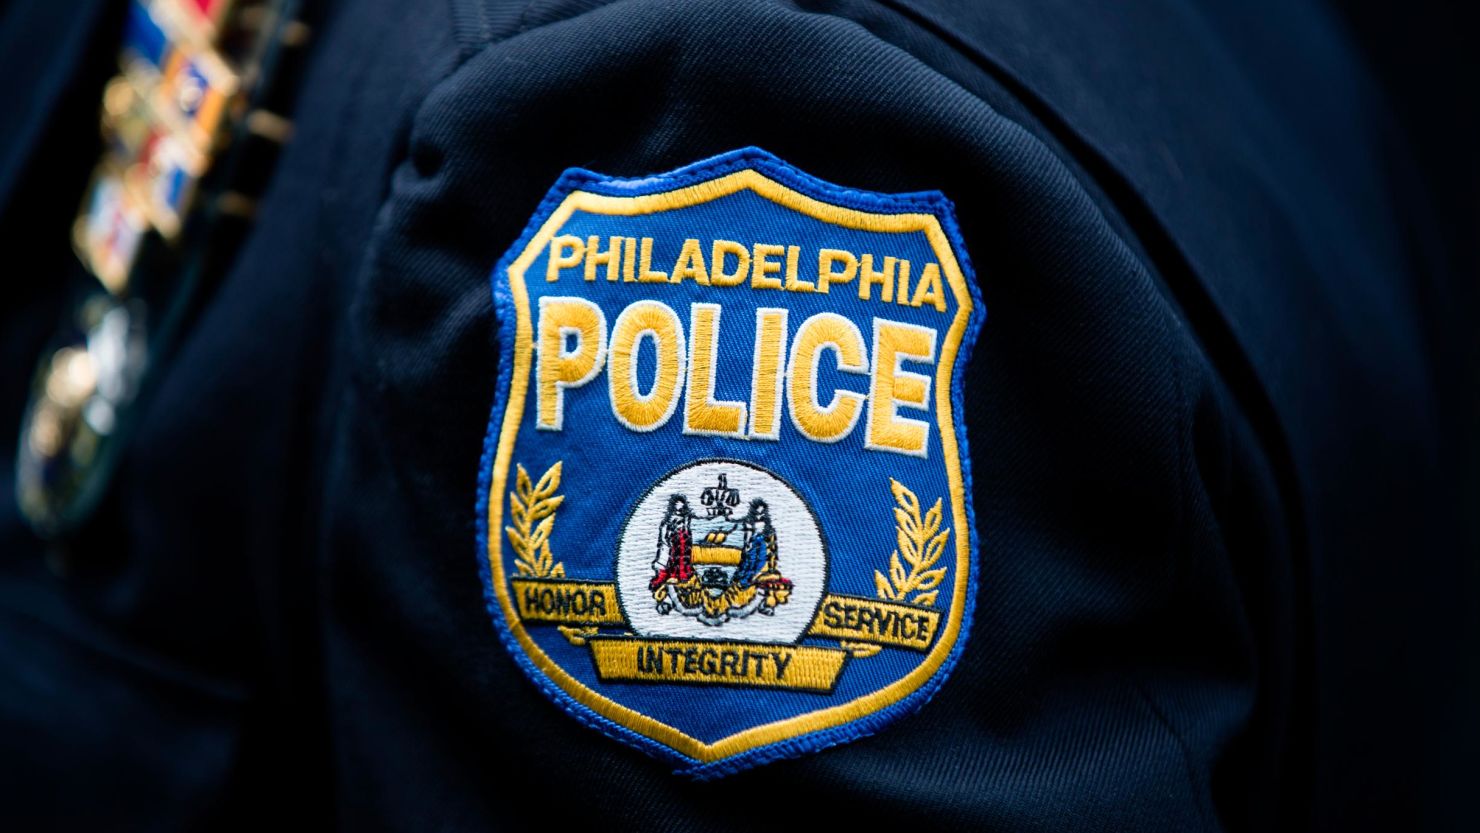 Police in Philadelphia have released a new policy outlining how officers should treat and interact with transgender and non-binary people.